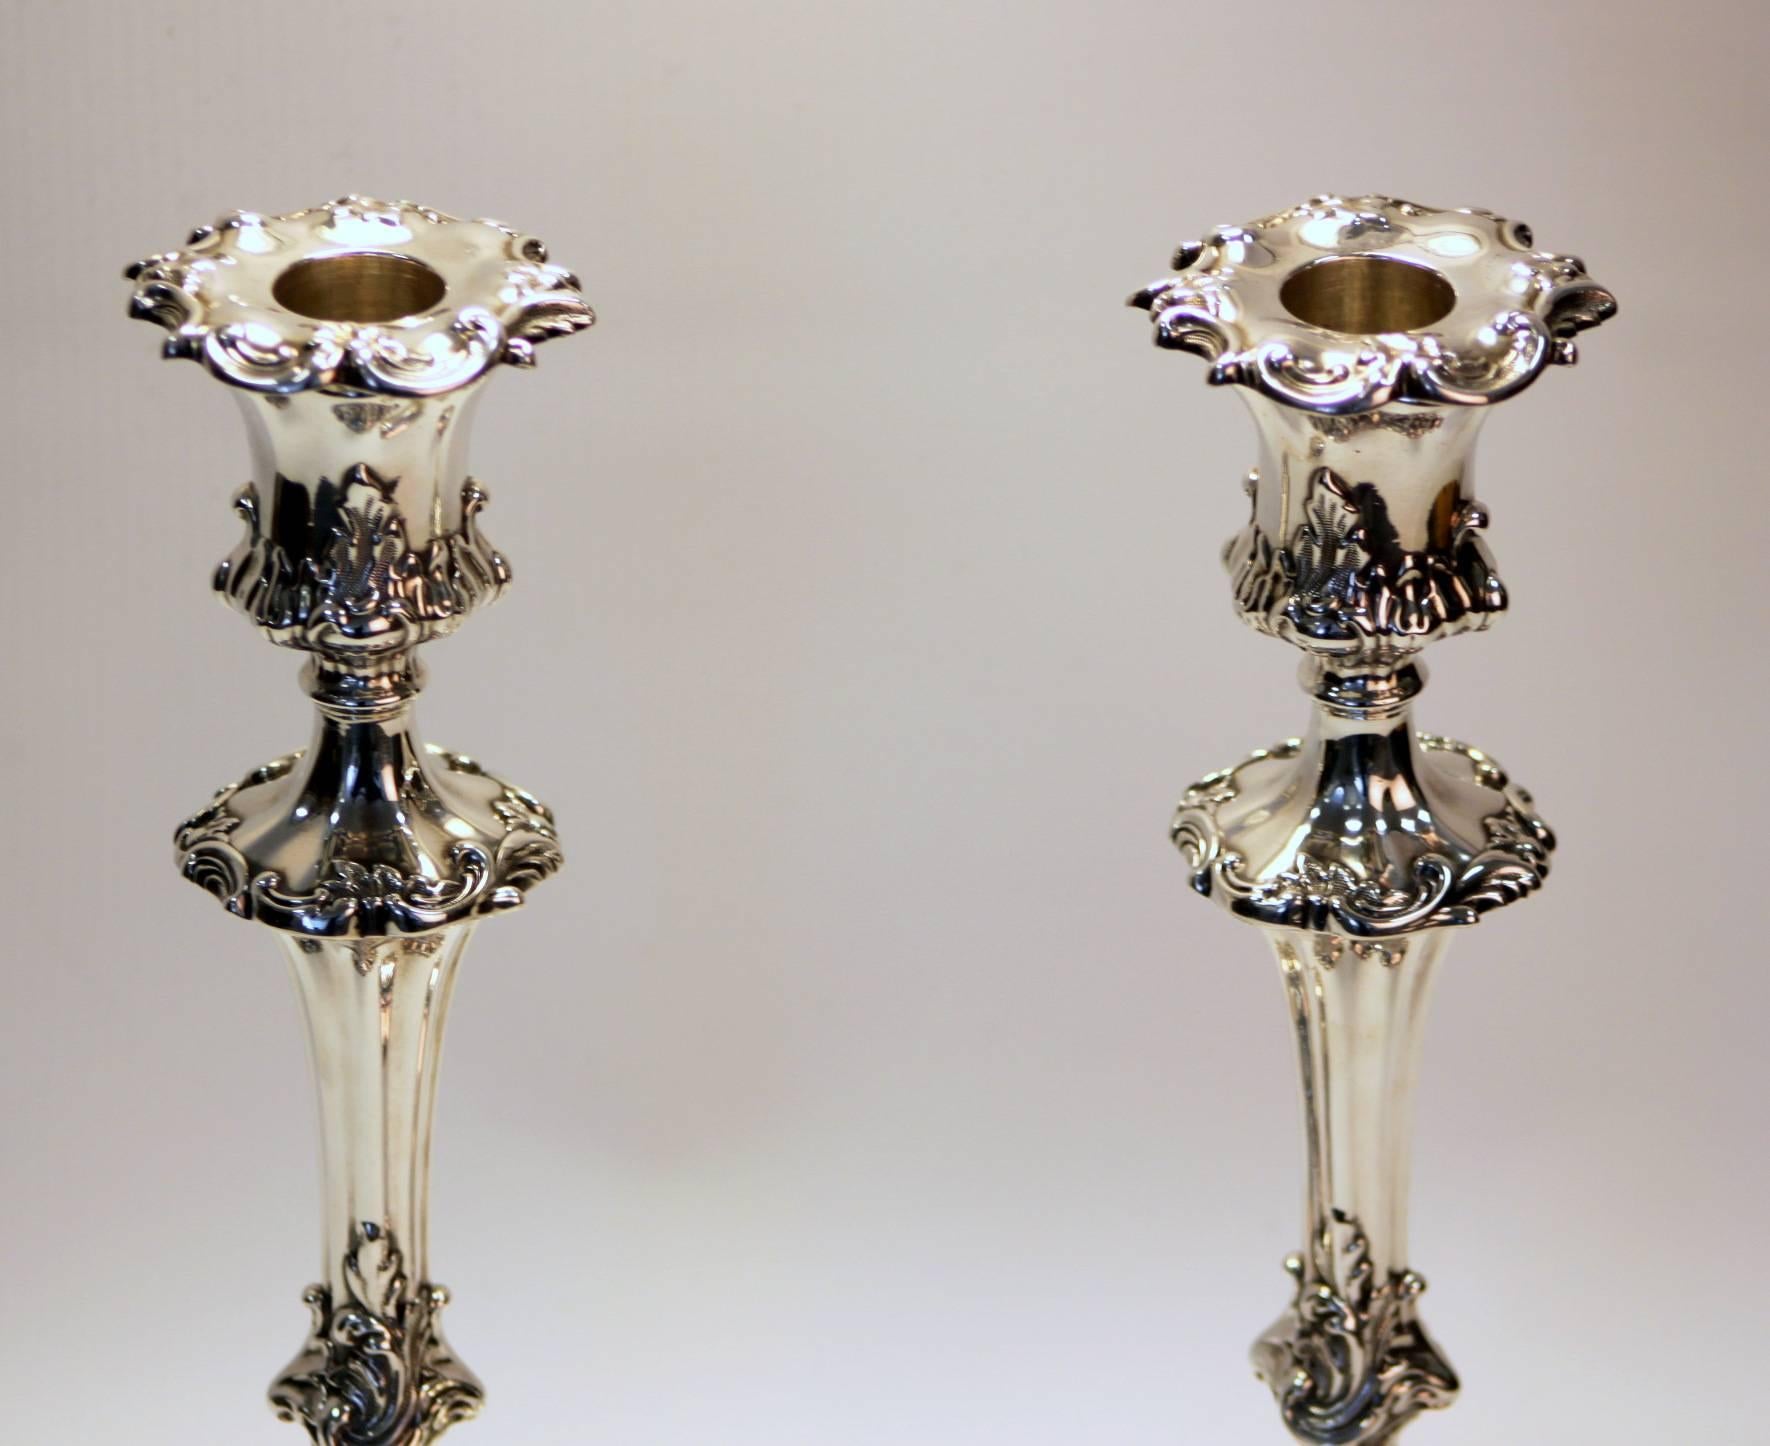 British Victorian Filled Silver Candlesticks with Floral Engravings, Sheffield, 1840